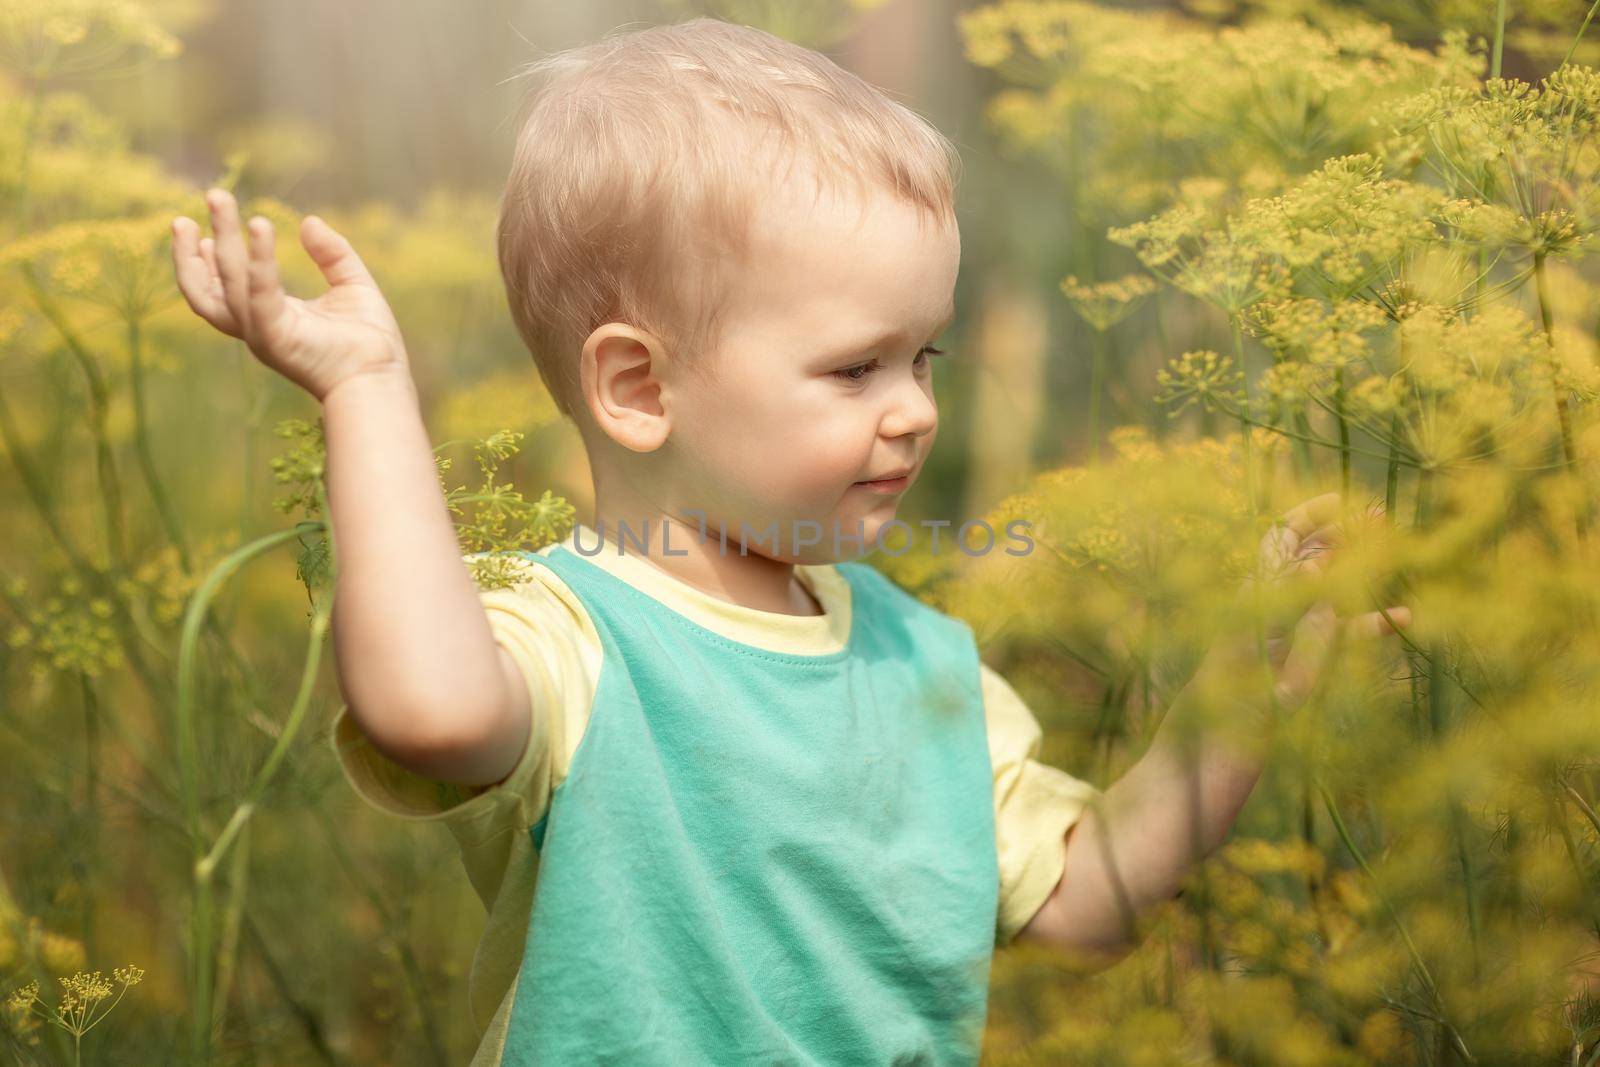 A little boy in the garden walks among the large, yellow dill plants.